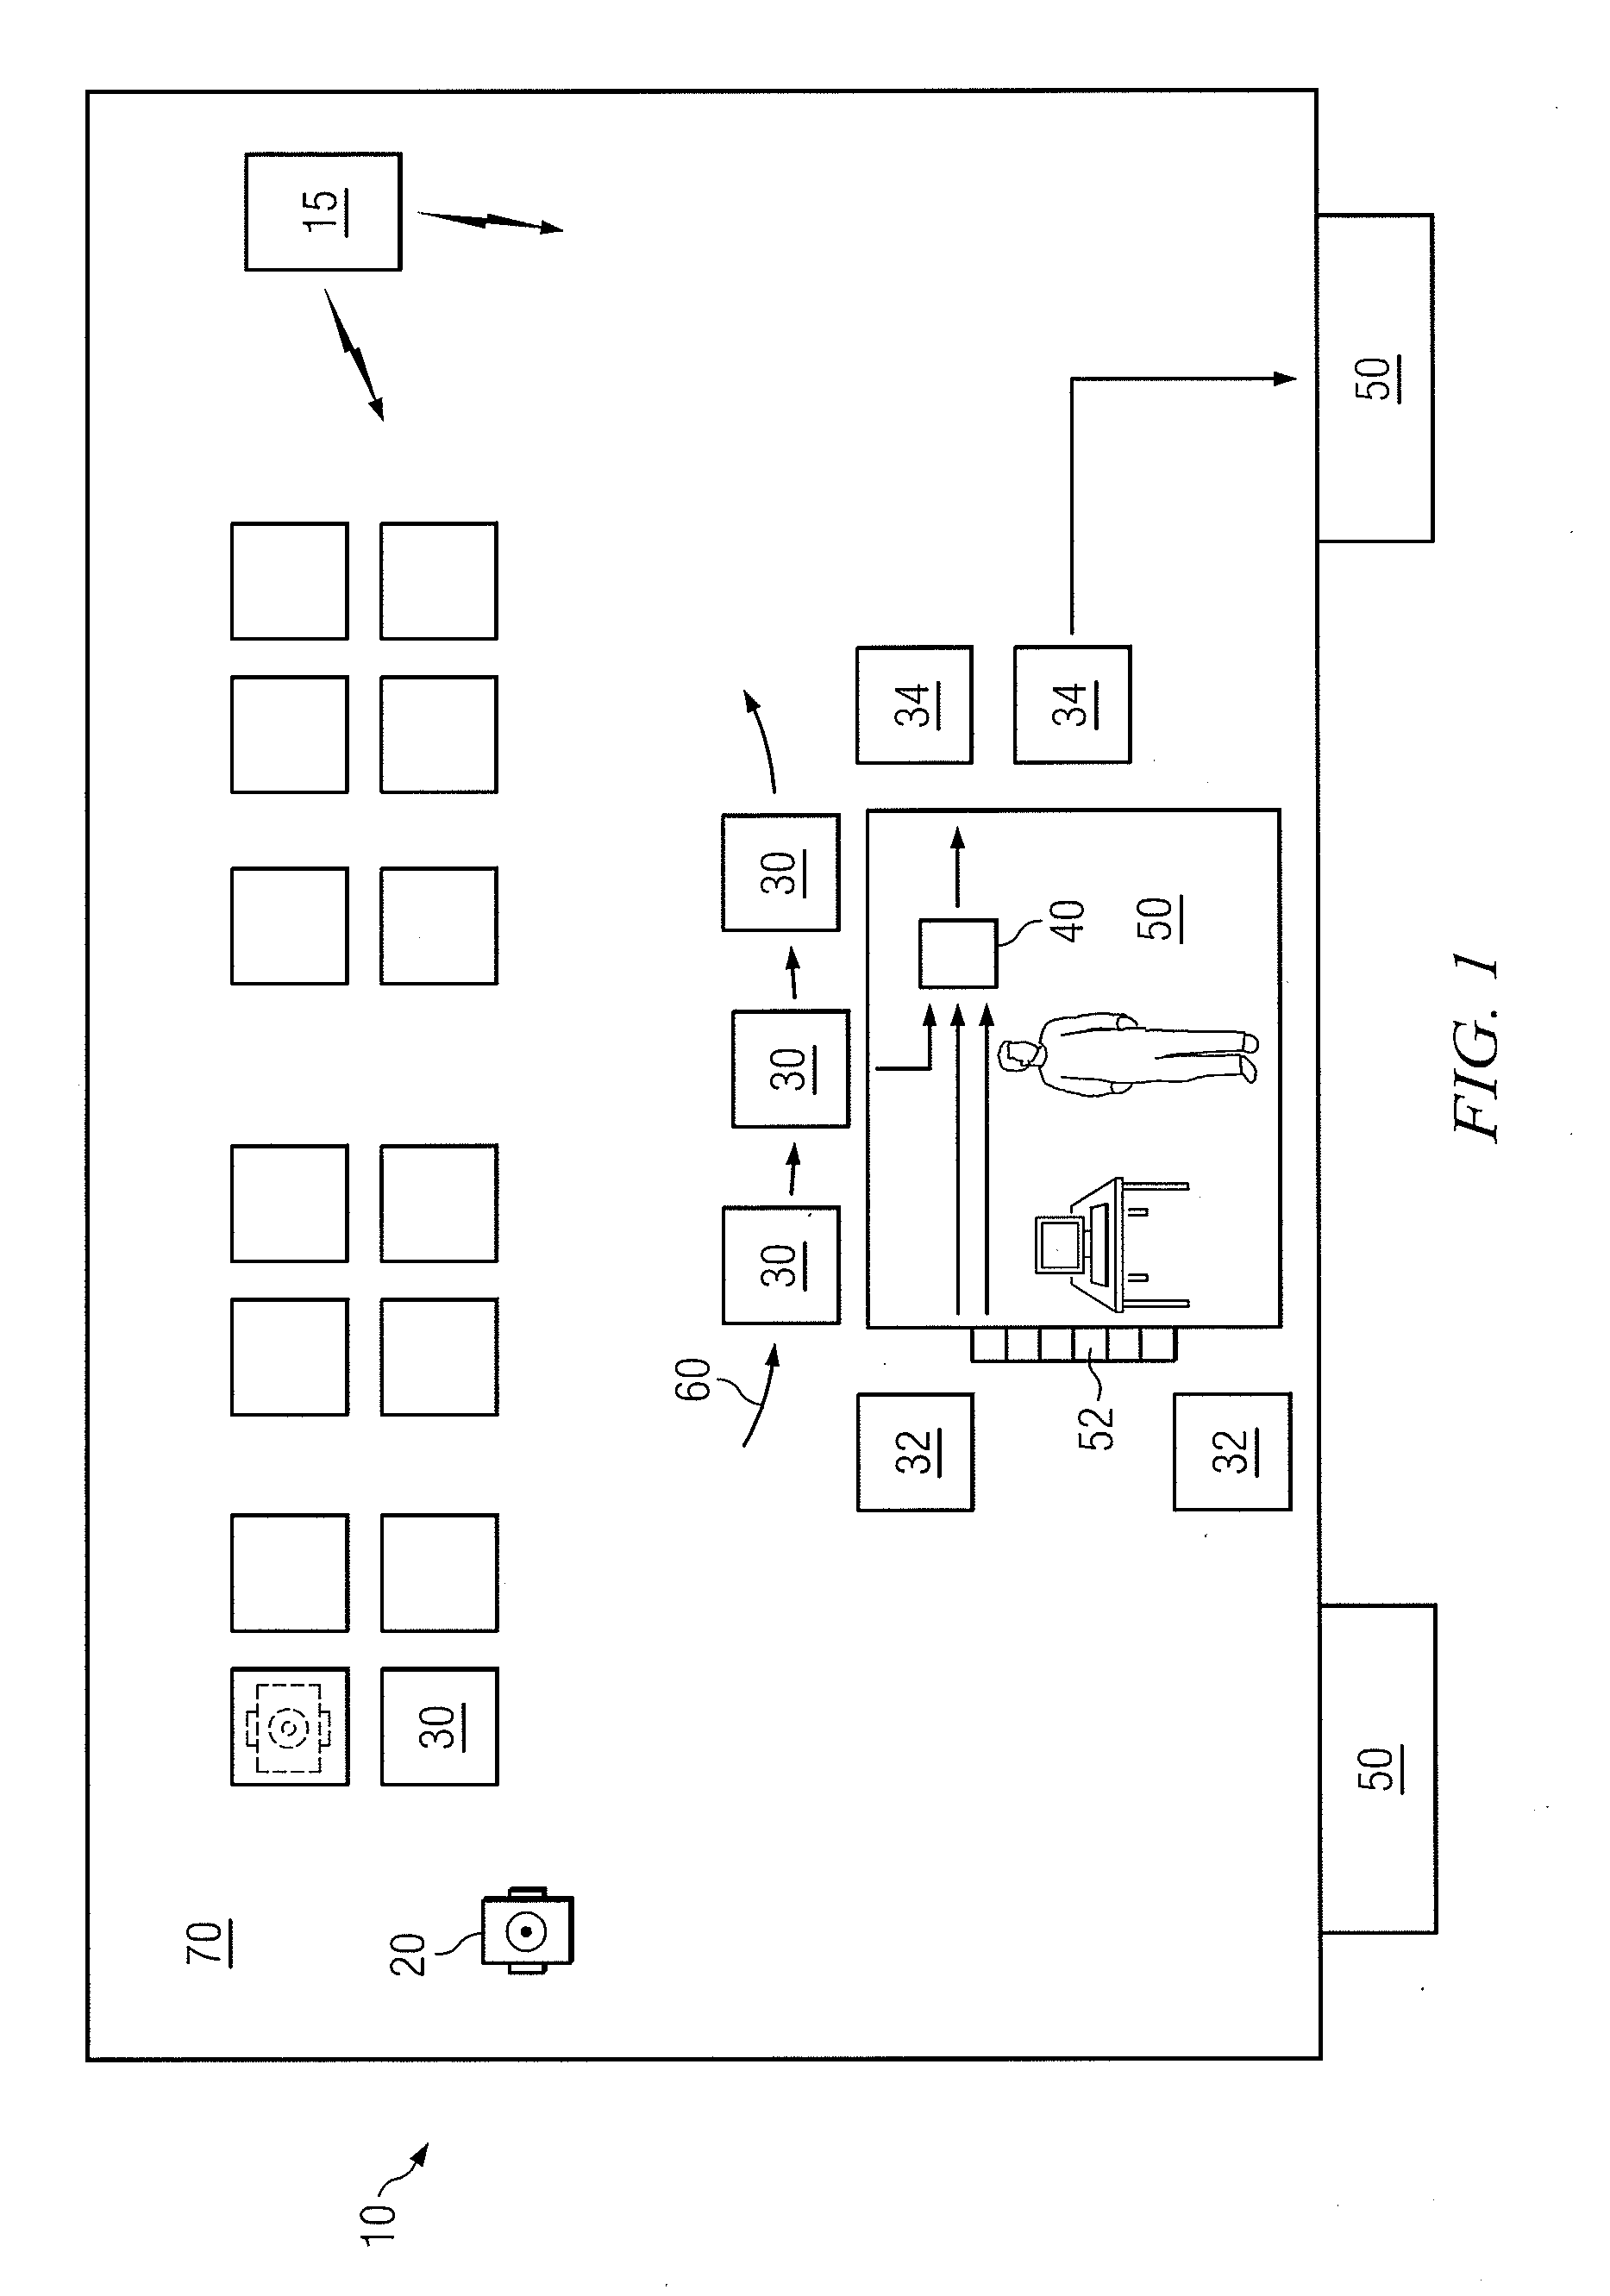 System and method for order fulfillment